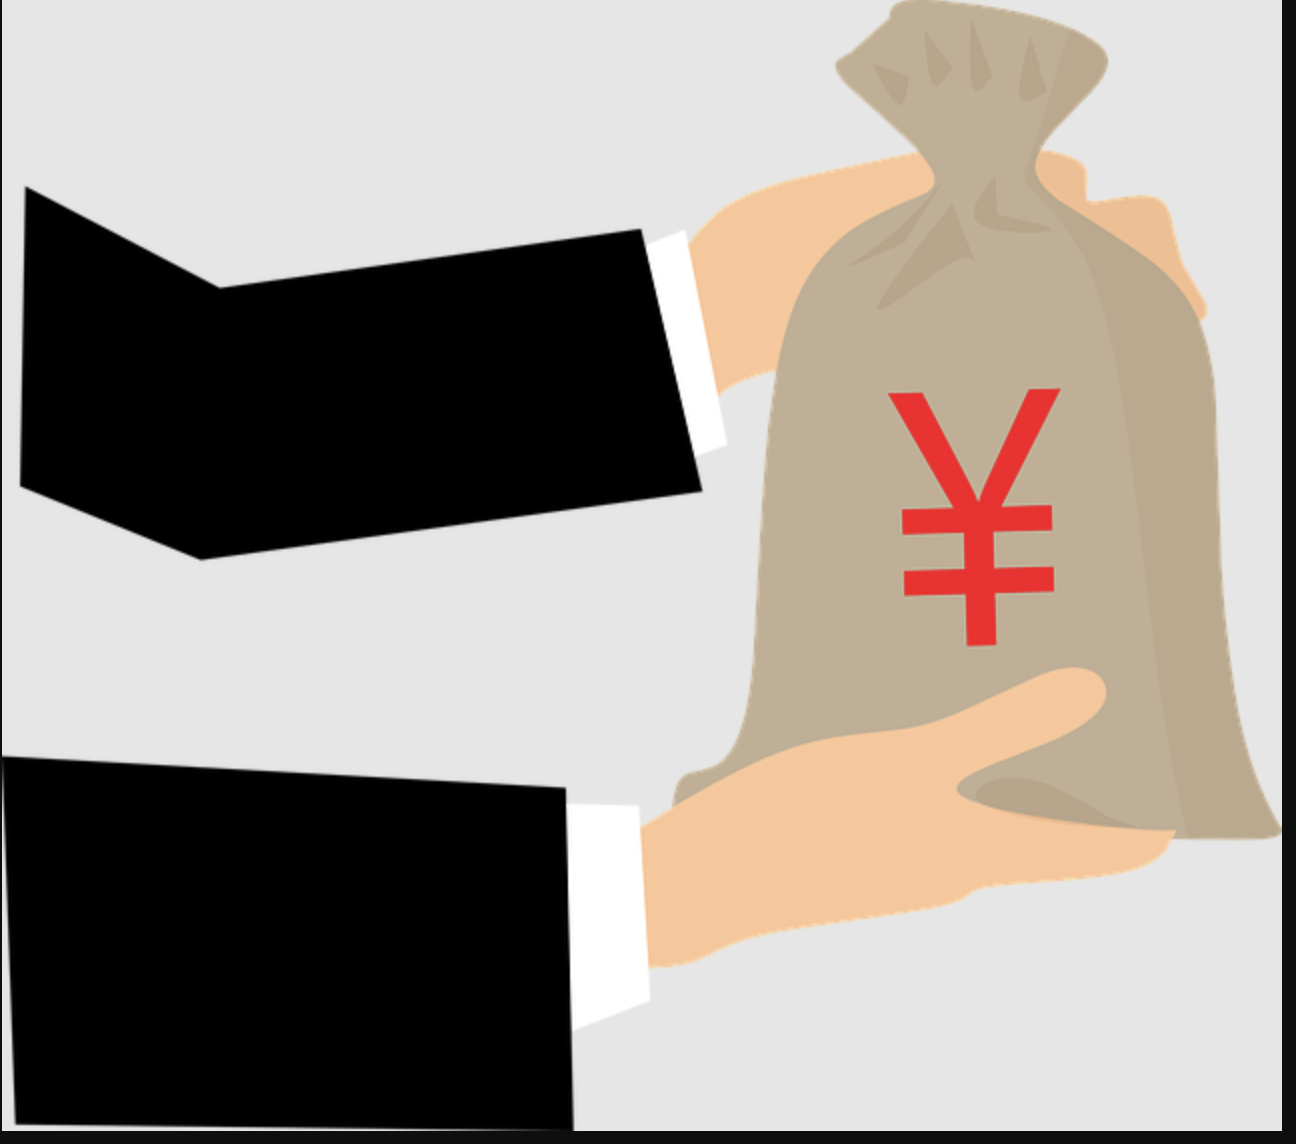 Graphic depiction of bag of Chinese yuan currency